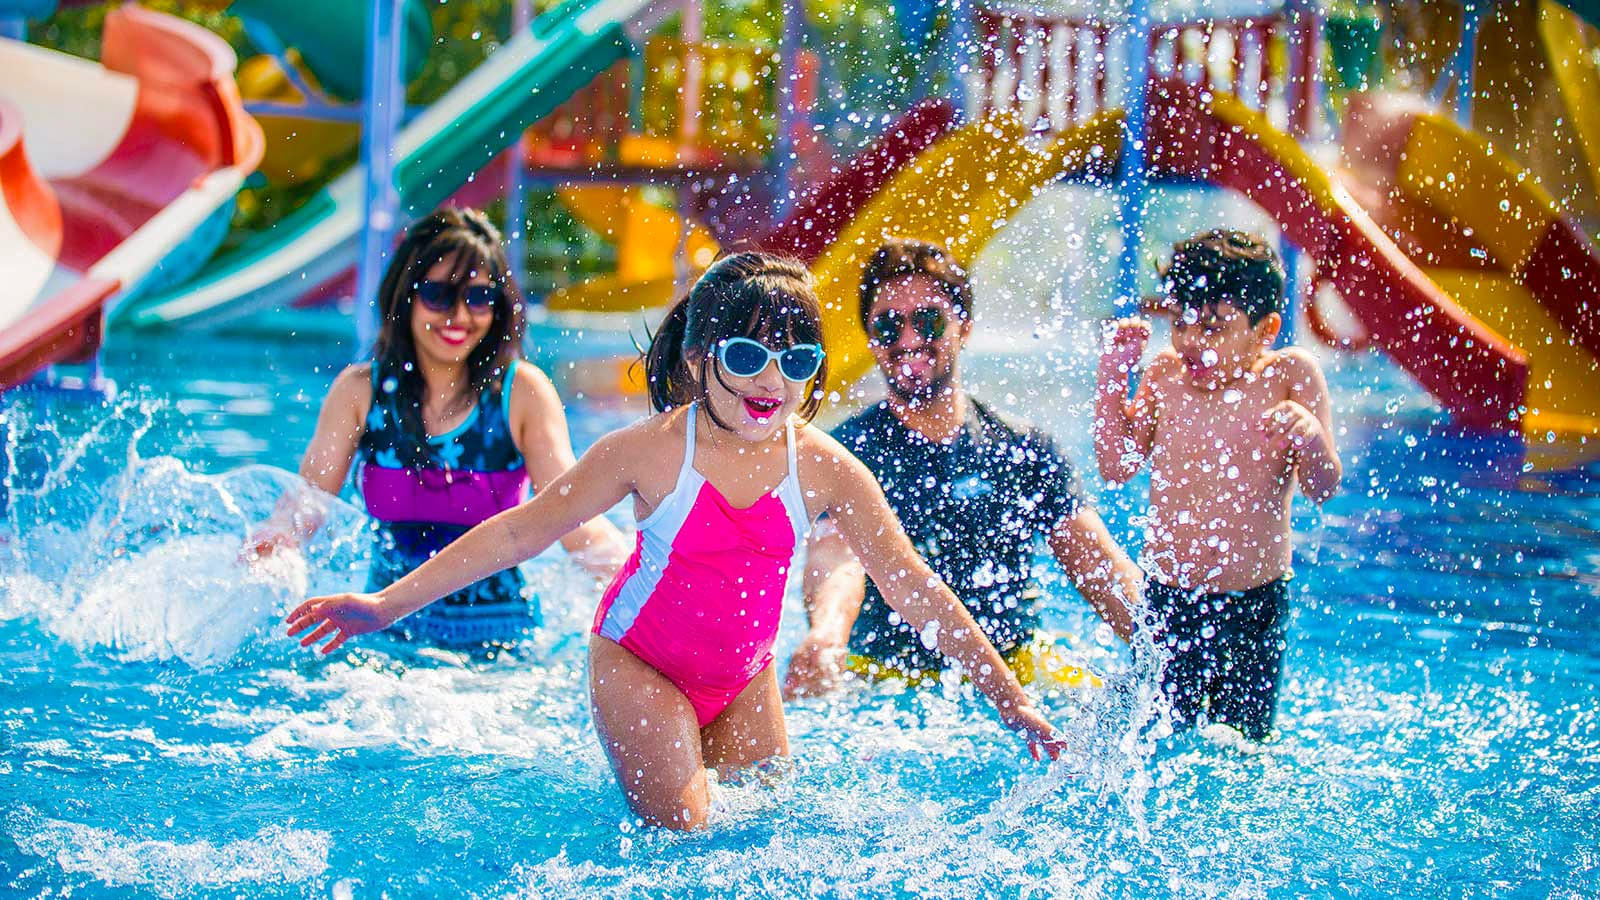 Enjoy a day at the Dream Valley Water Park in Hyderabad